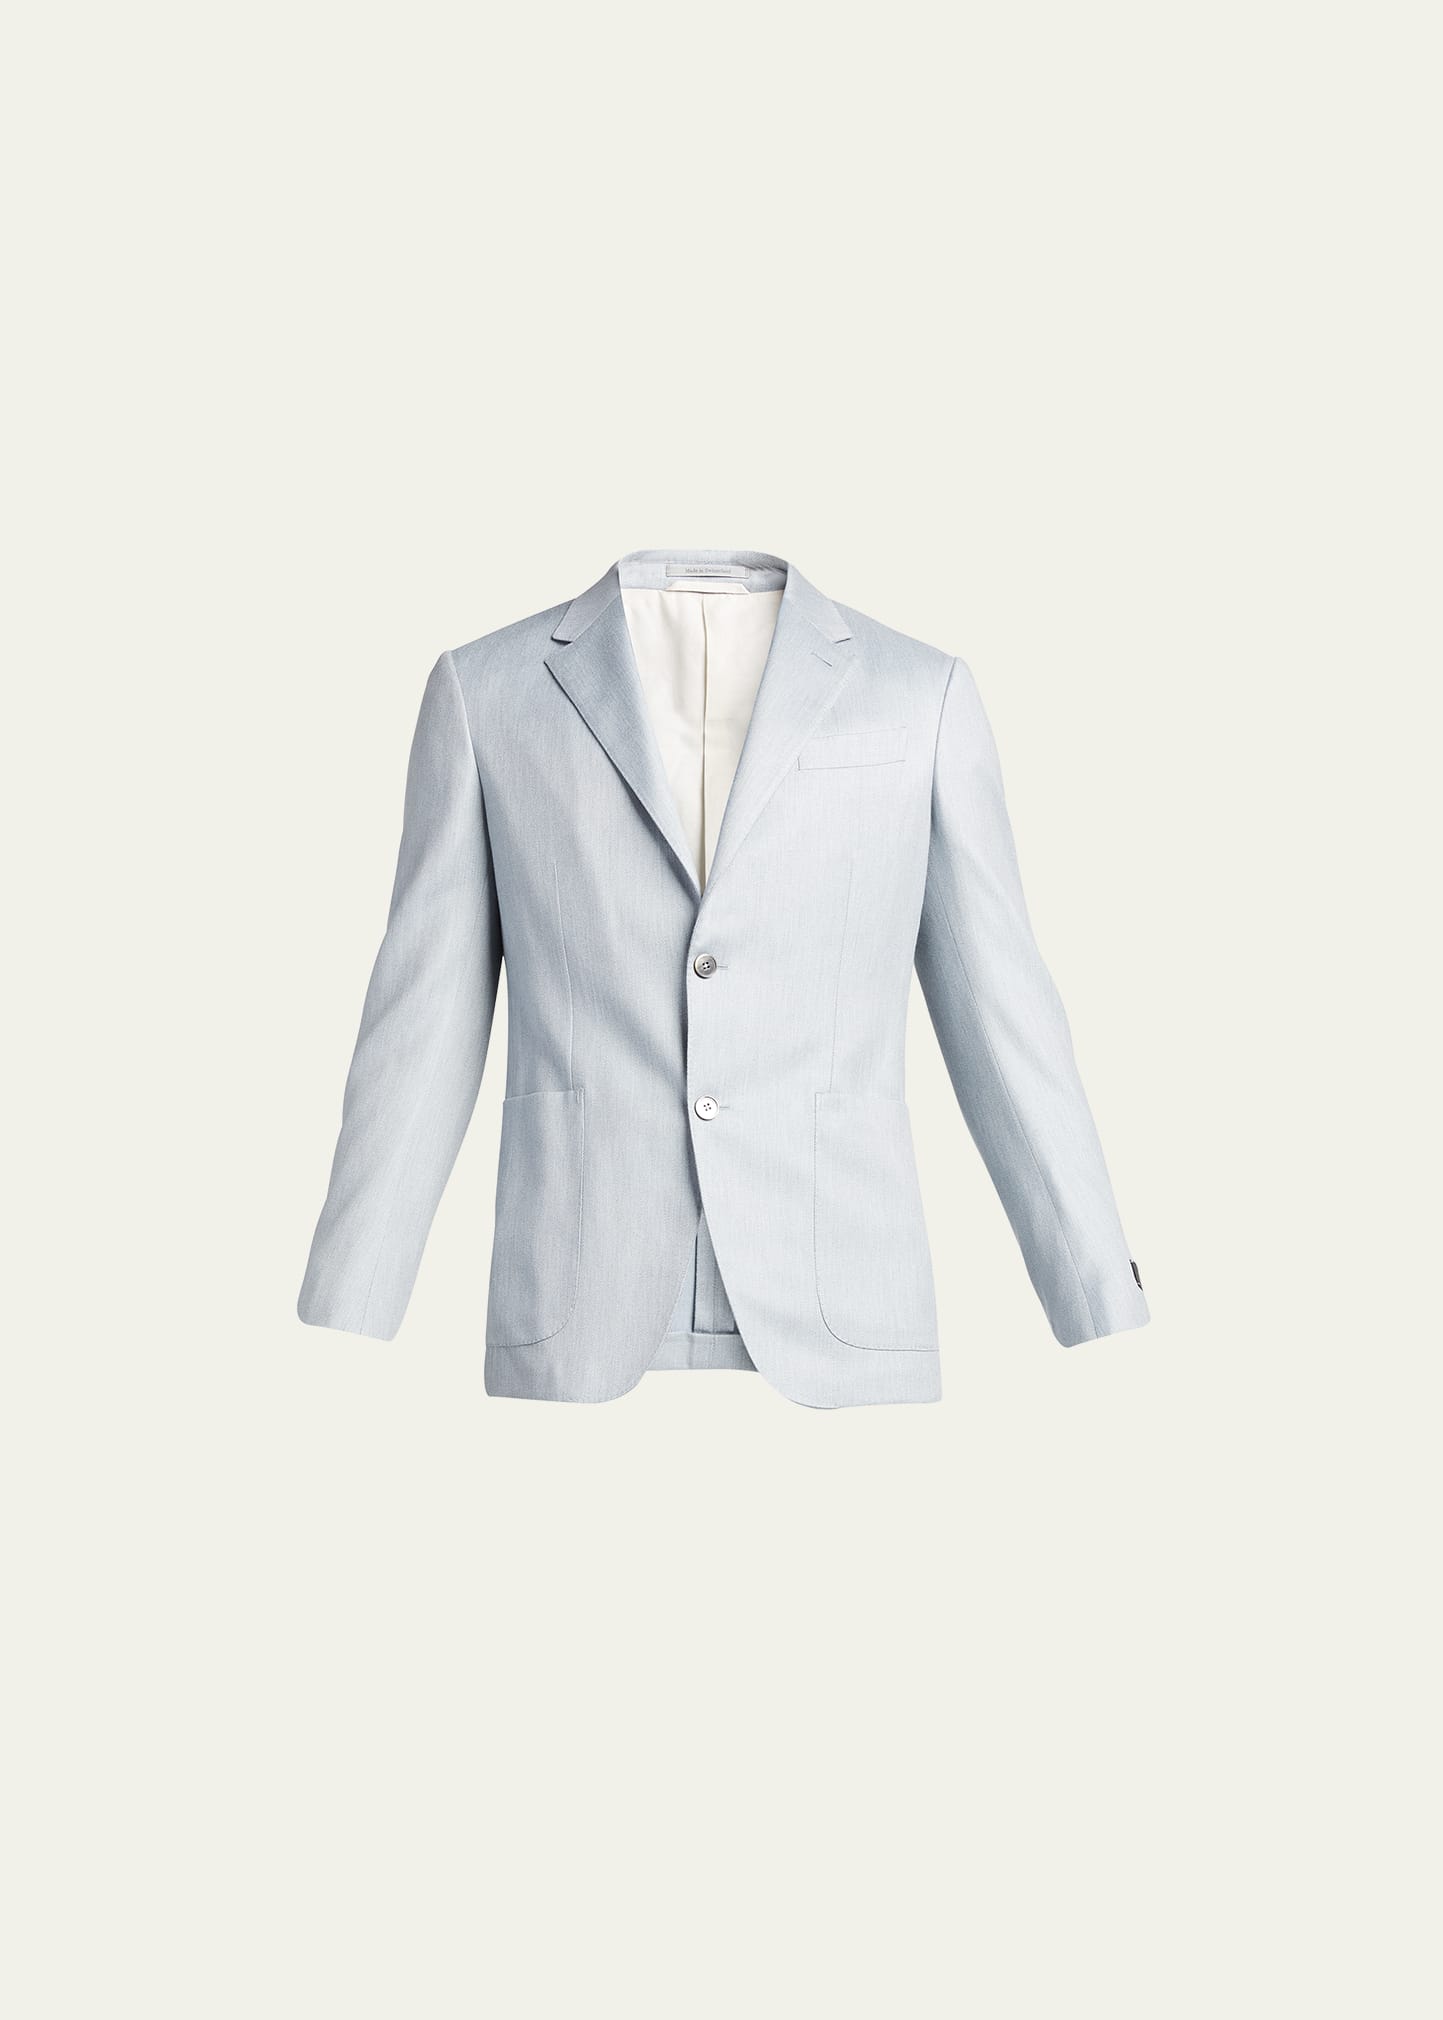 Zegna Men's Crossover Linen And Wool-blend Shirt Jacket In Bright Blue Solid